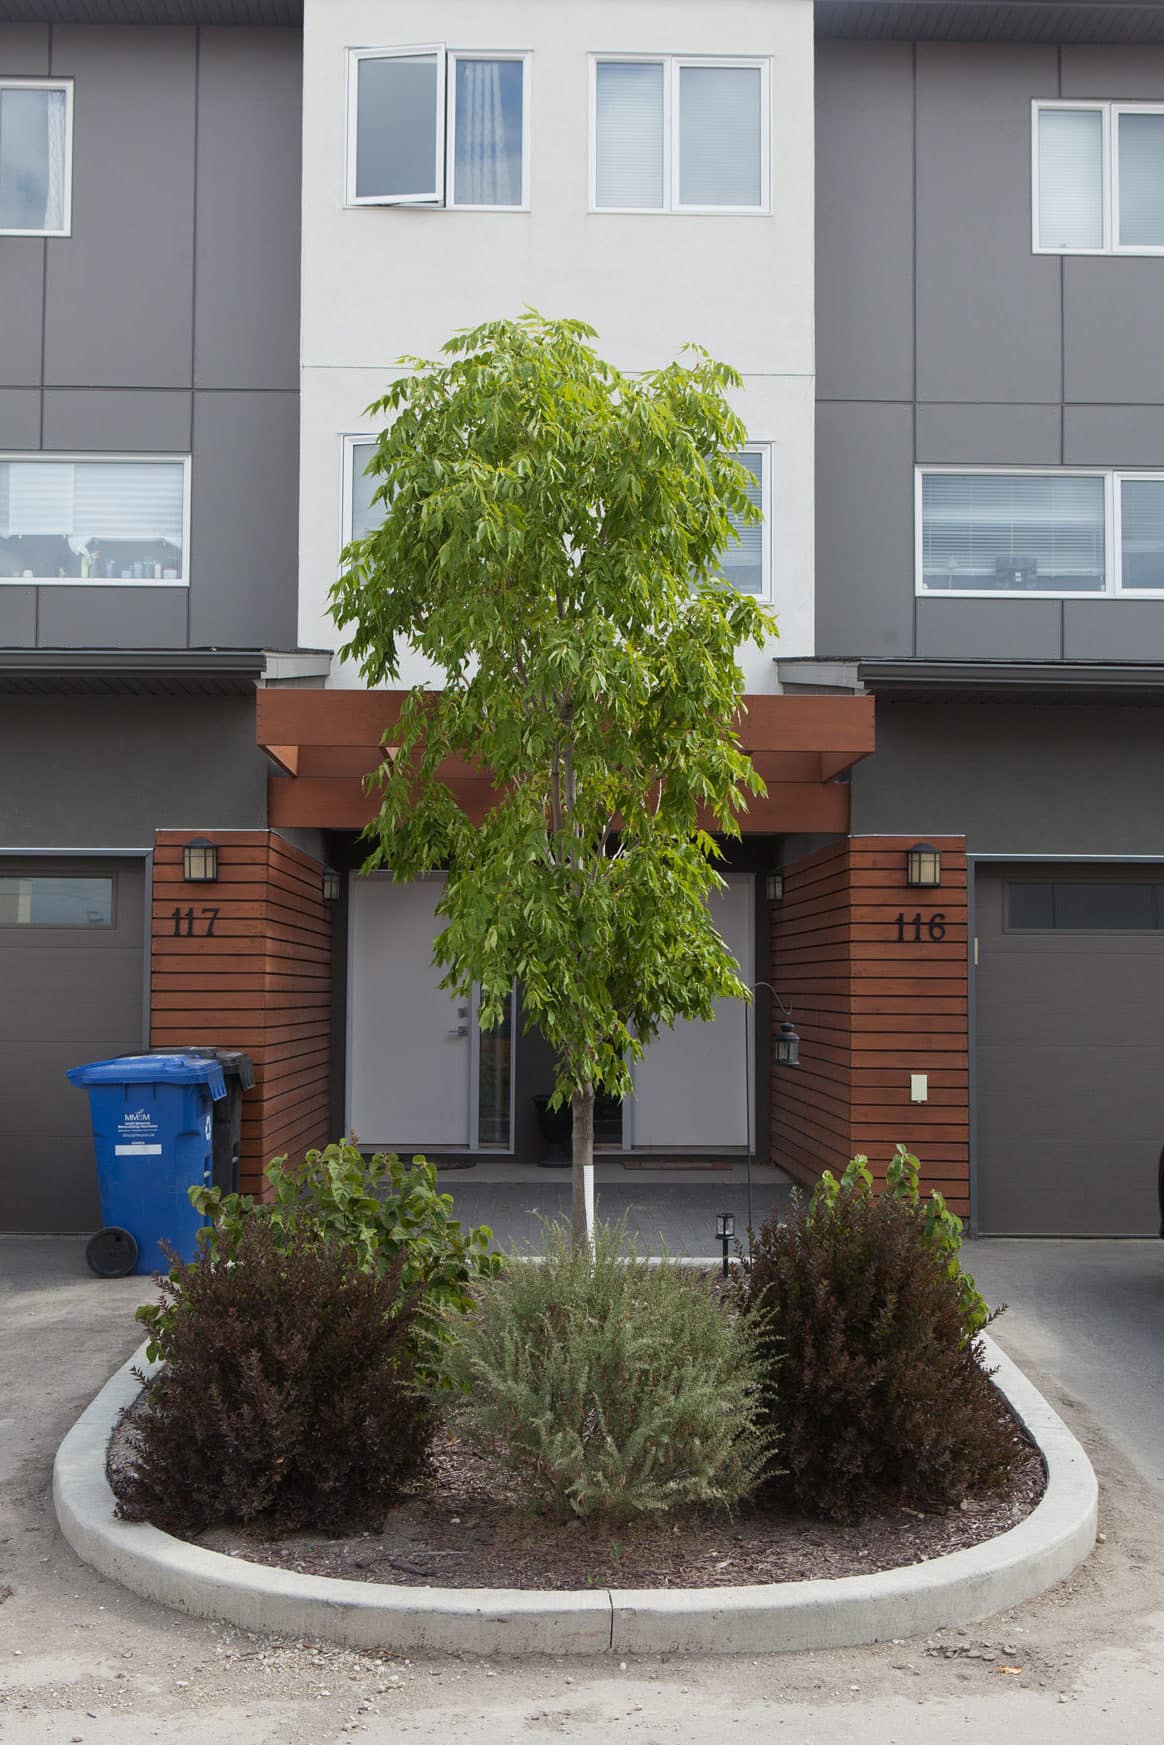 Modern minimalist landscaping, which includes one tree and a few bushes in a planters bed, in front of a sleek modern condo entrance.